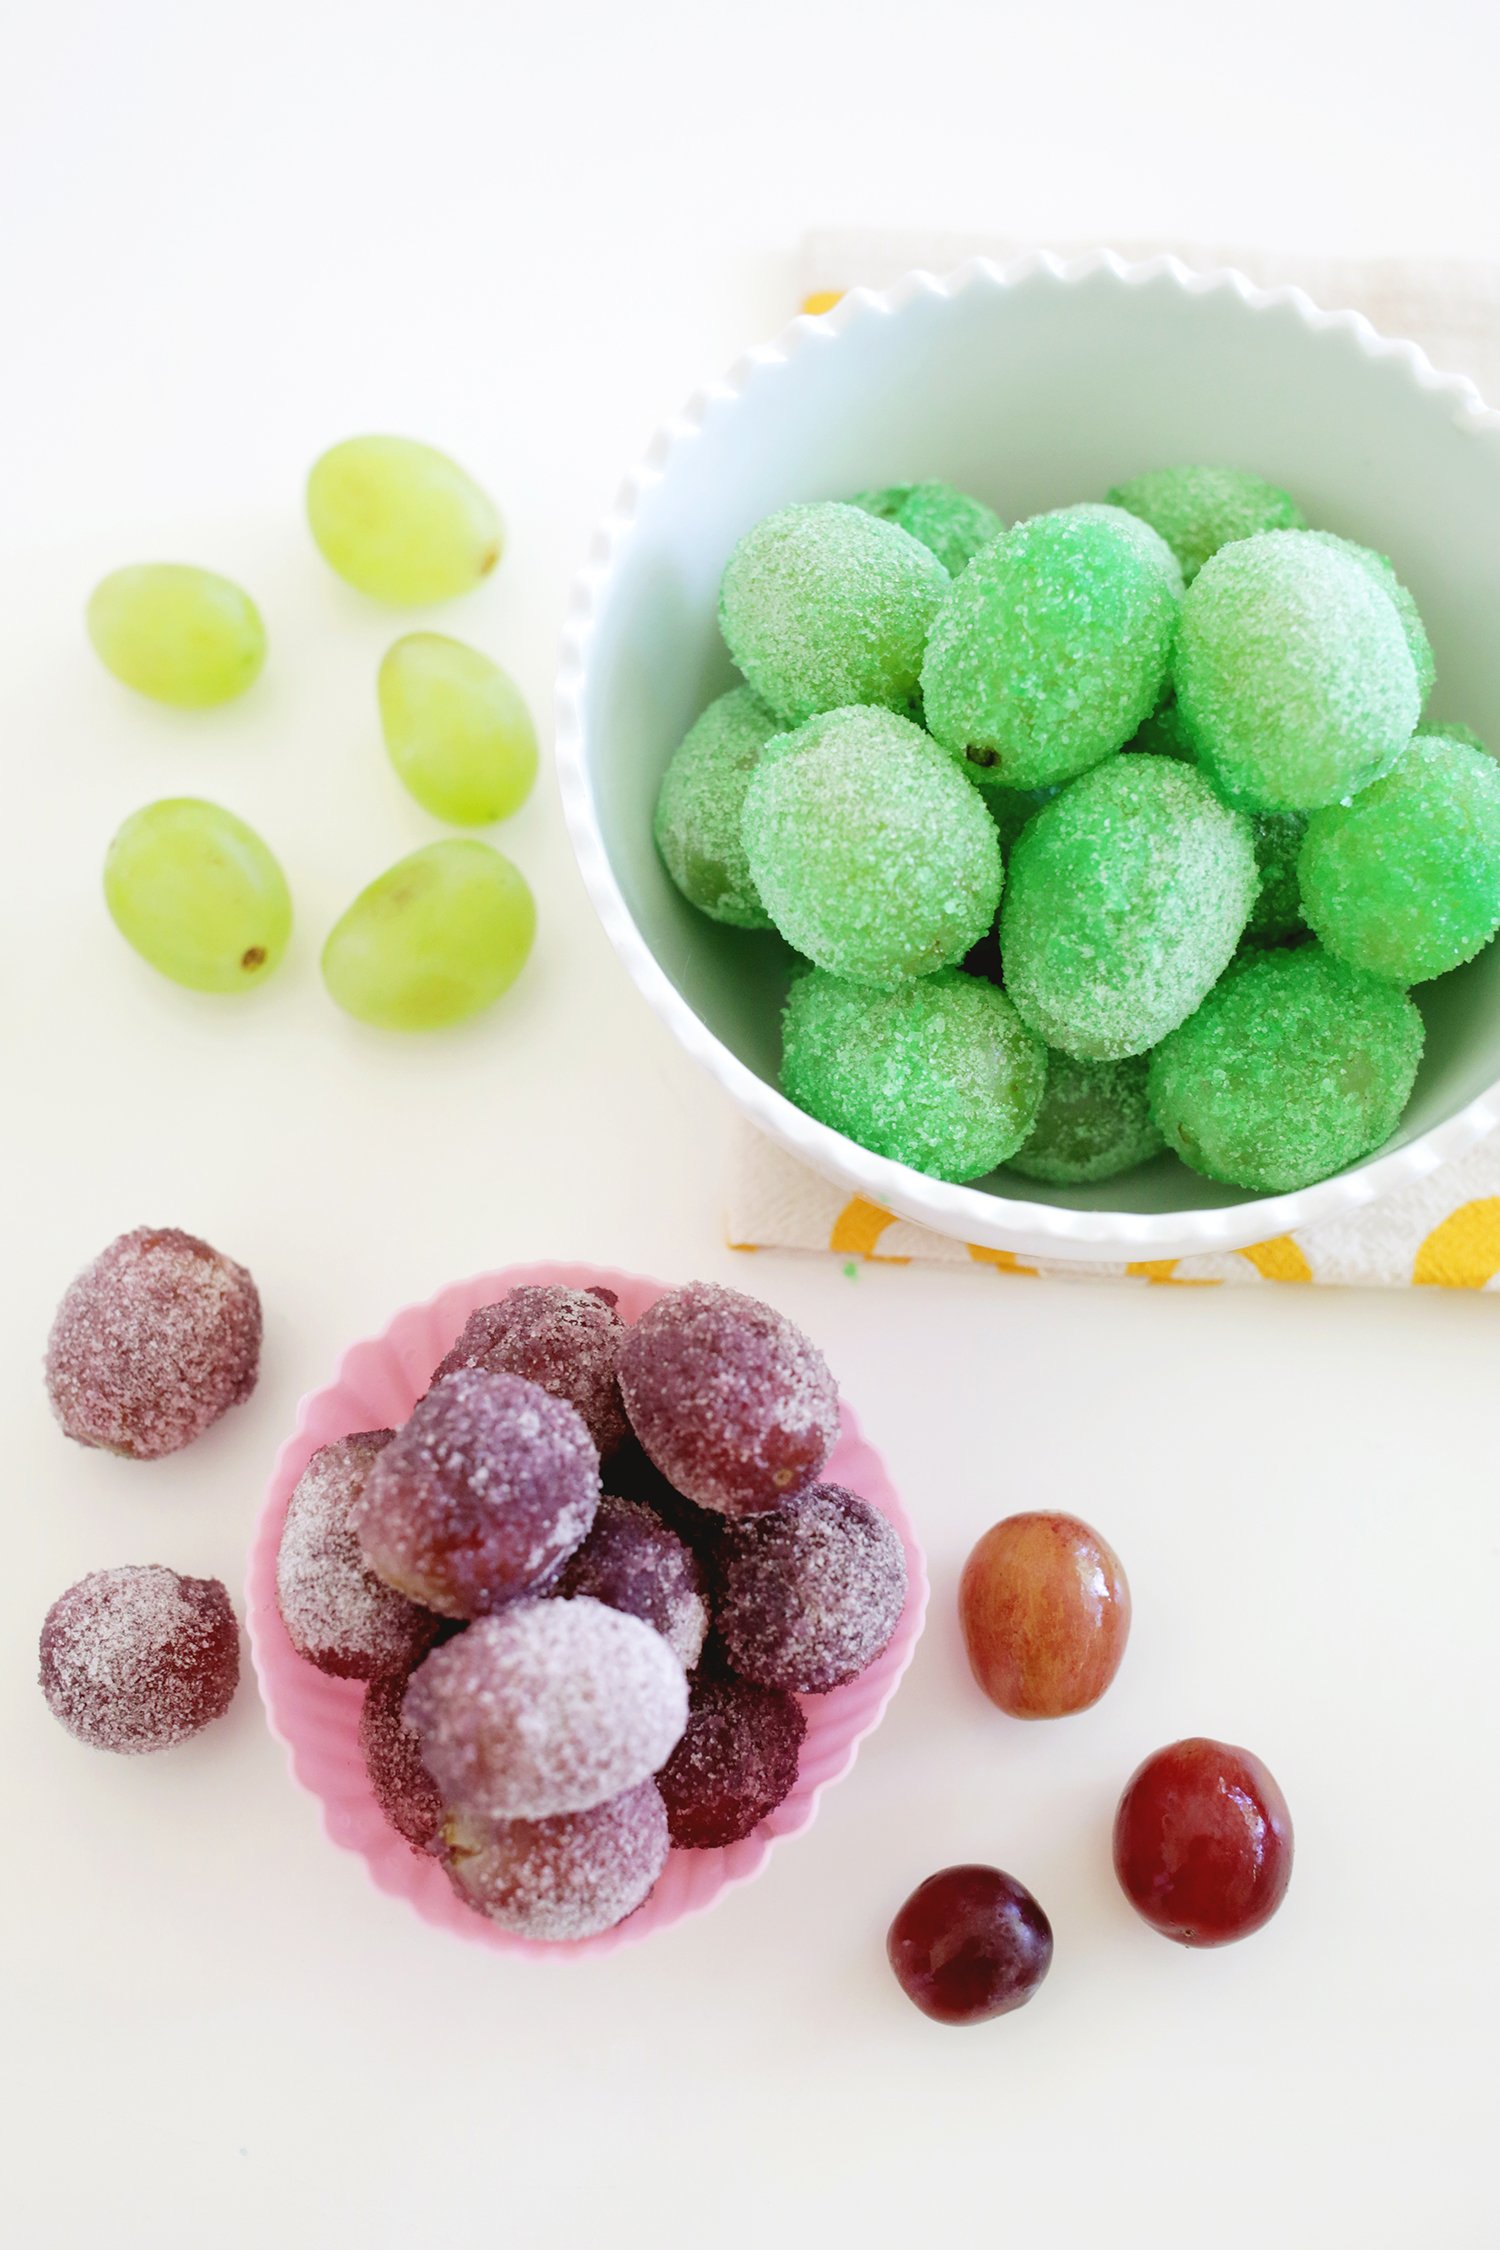 candied grapes with jello powder